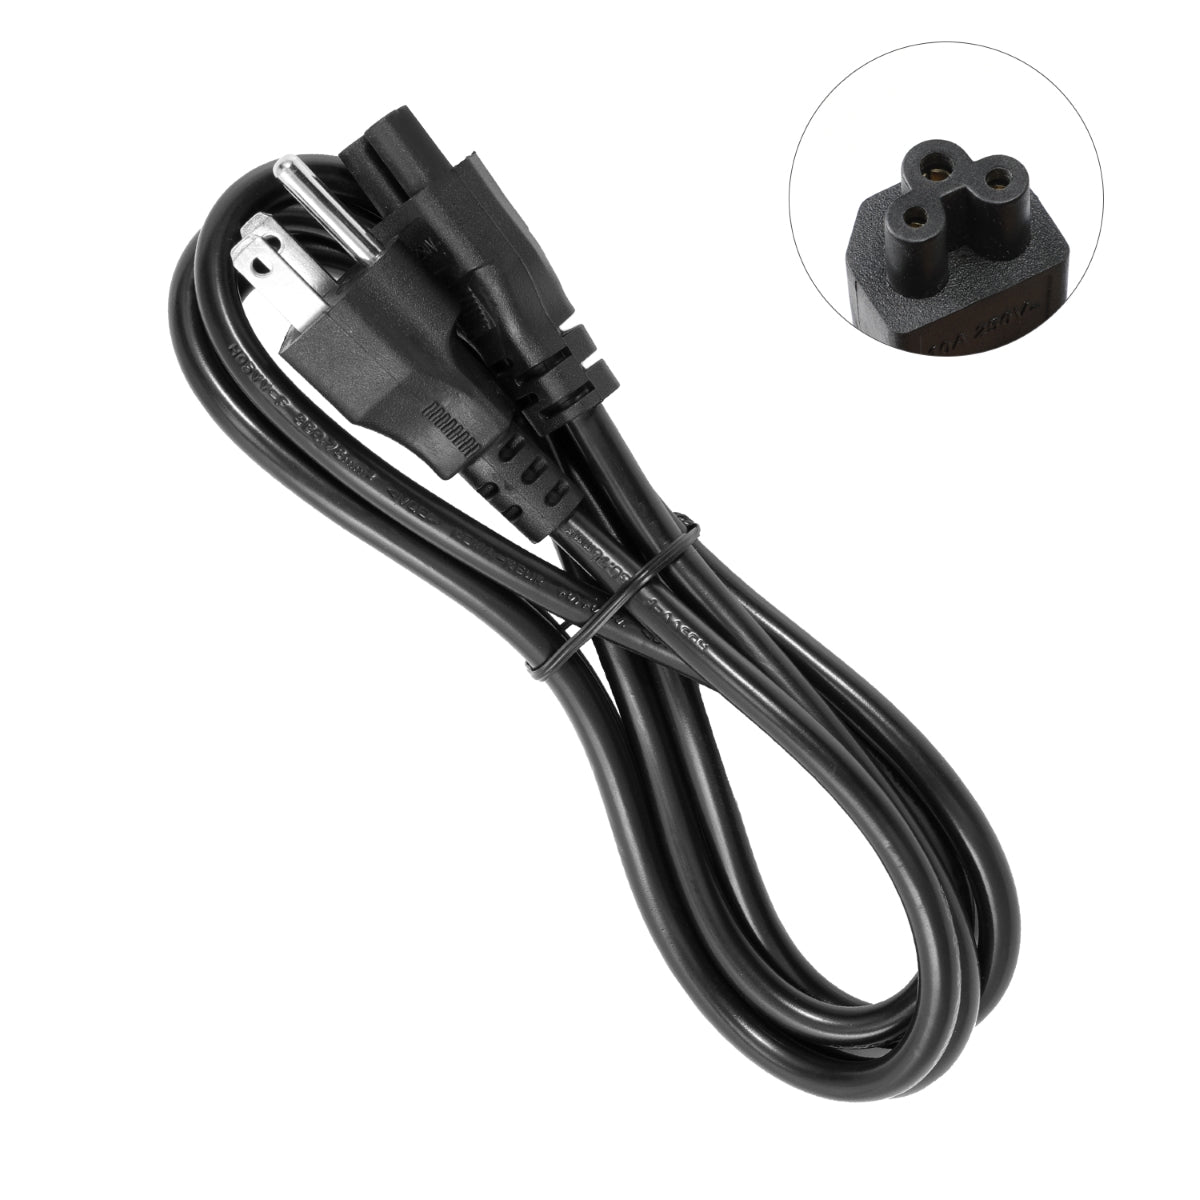 Power Cord for LG 42LB5800 Monitor.